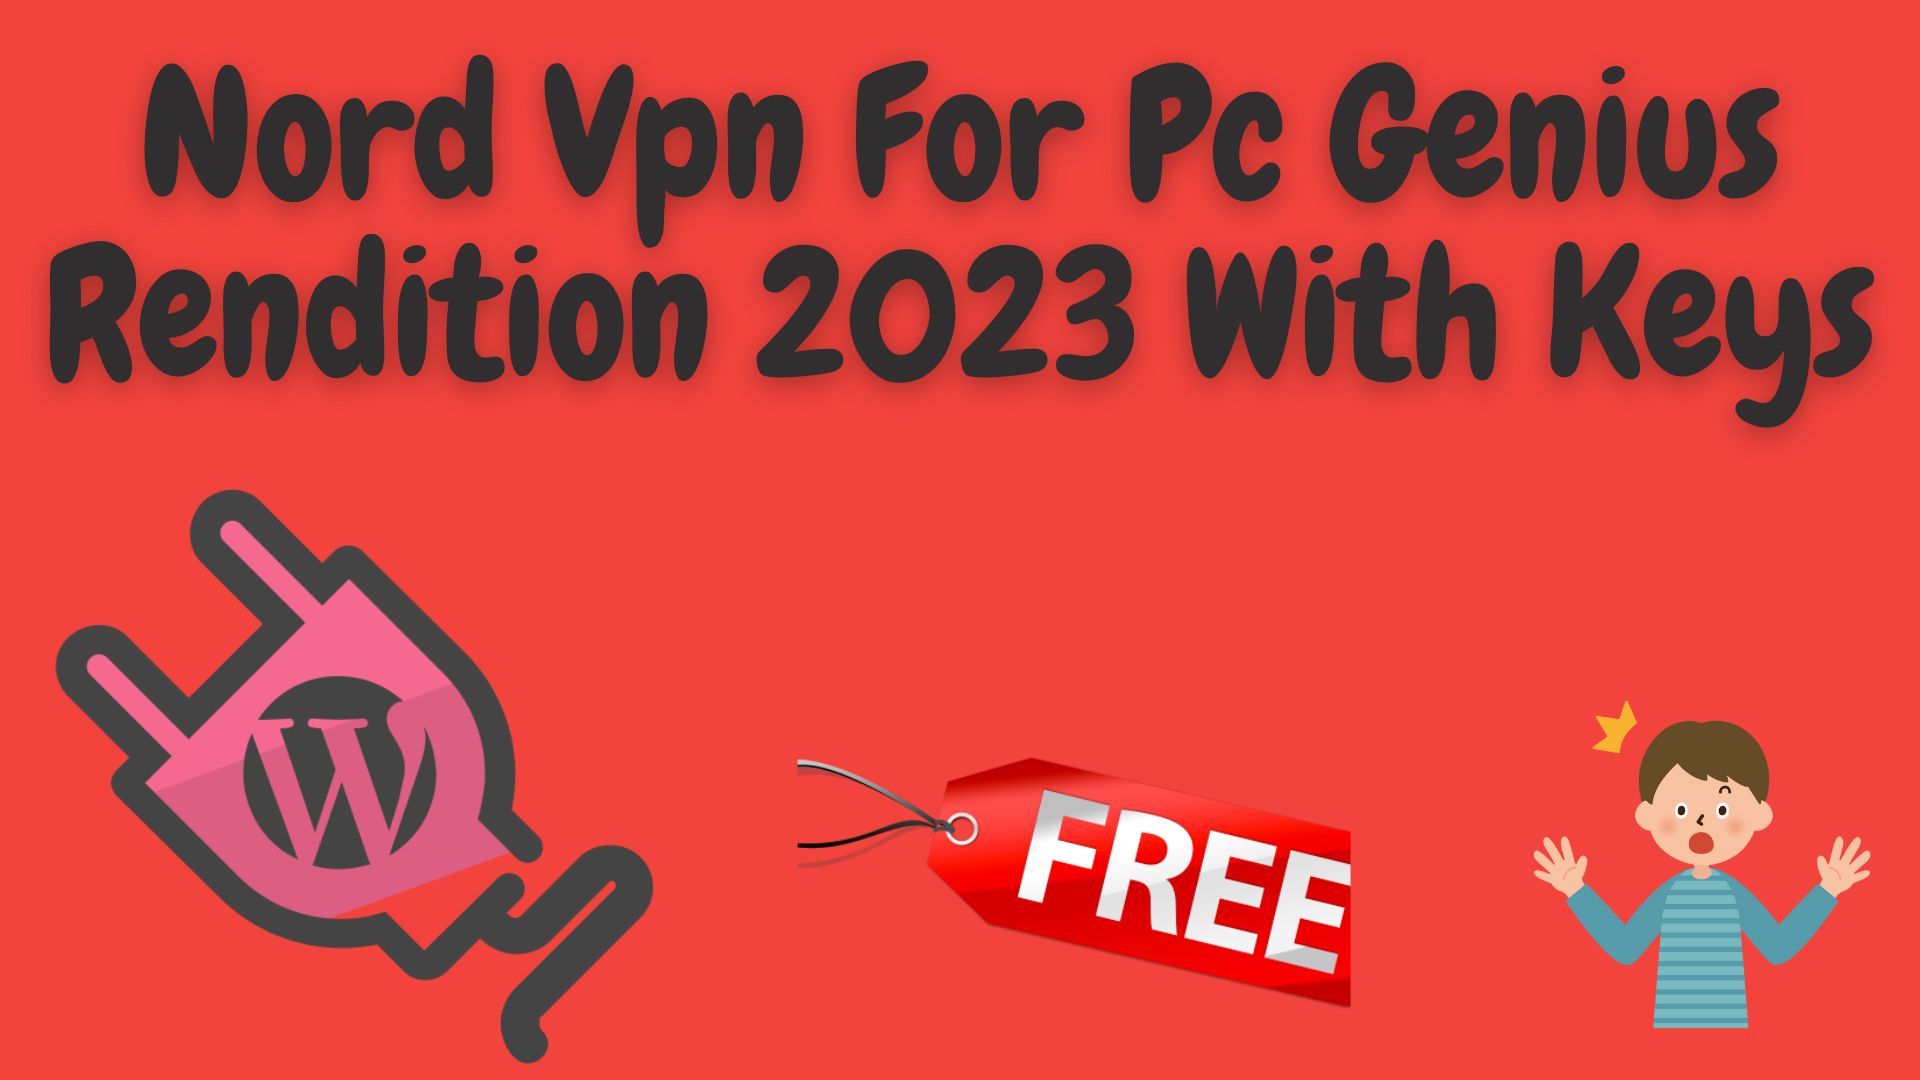 Nord vpn for pc genius rendition 2023 with keys